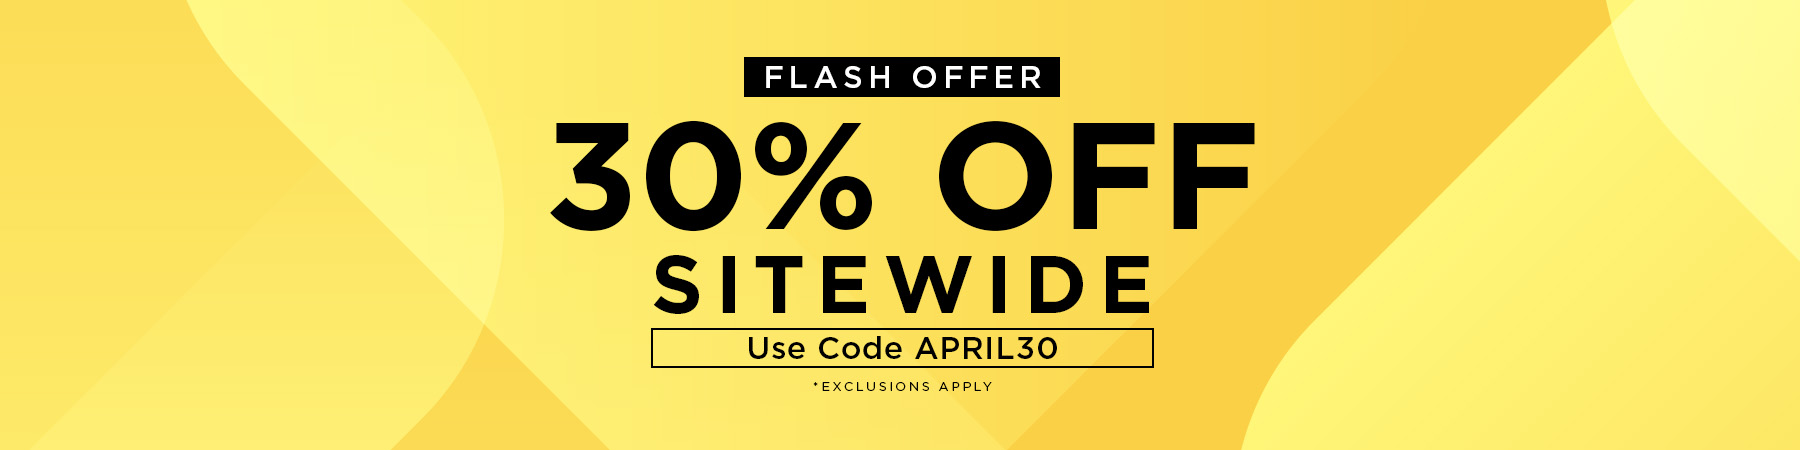 30% Off Sitewide!					
*Exclusions Apply					
Use Code APRIL30